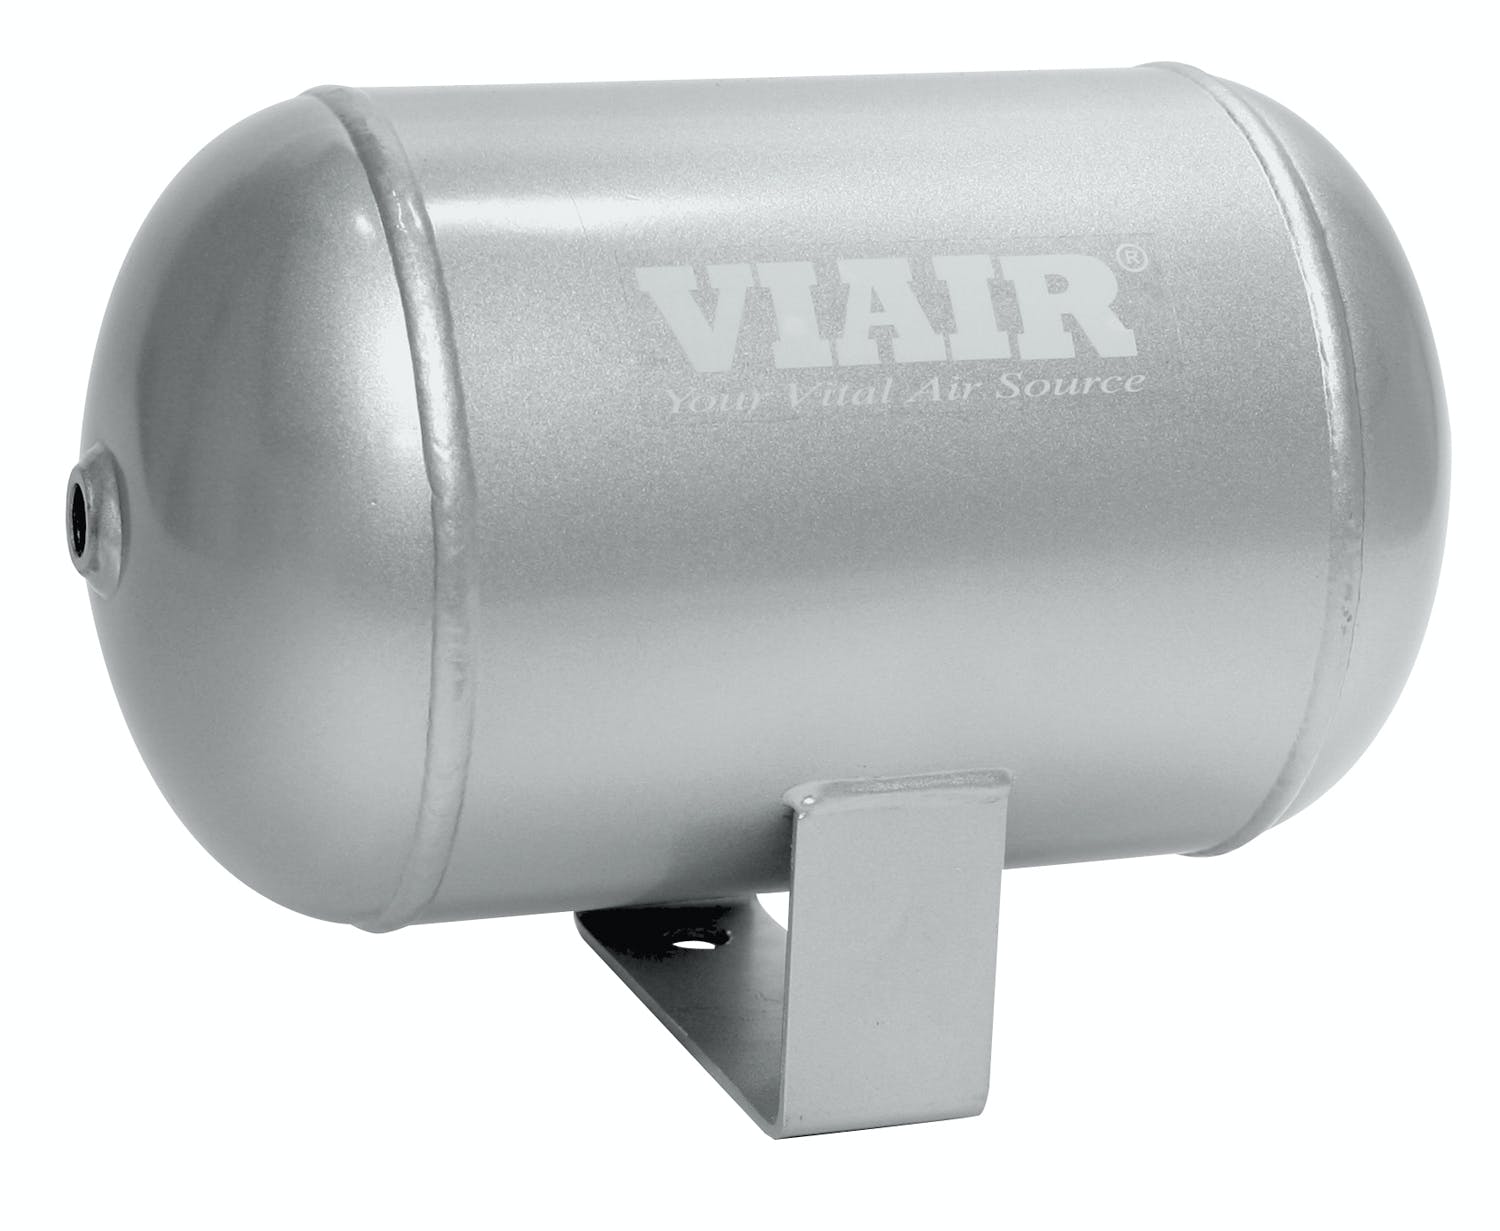 VIAIR 91014 1.0 Gallon Tank  Four 1/4in NPT Ports  150 psi Rated